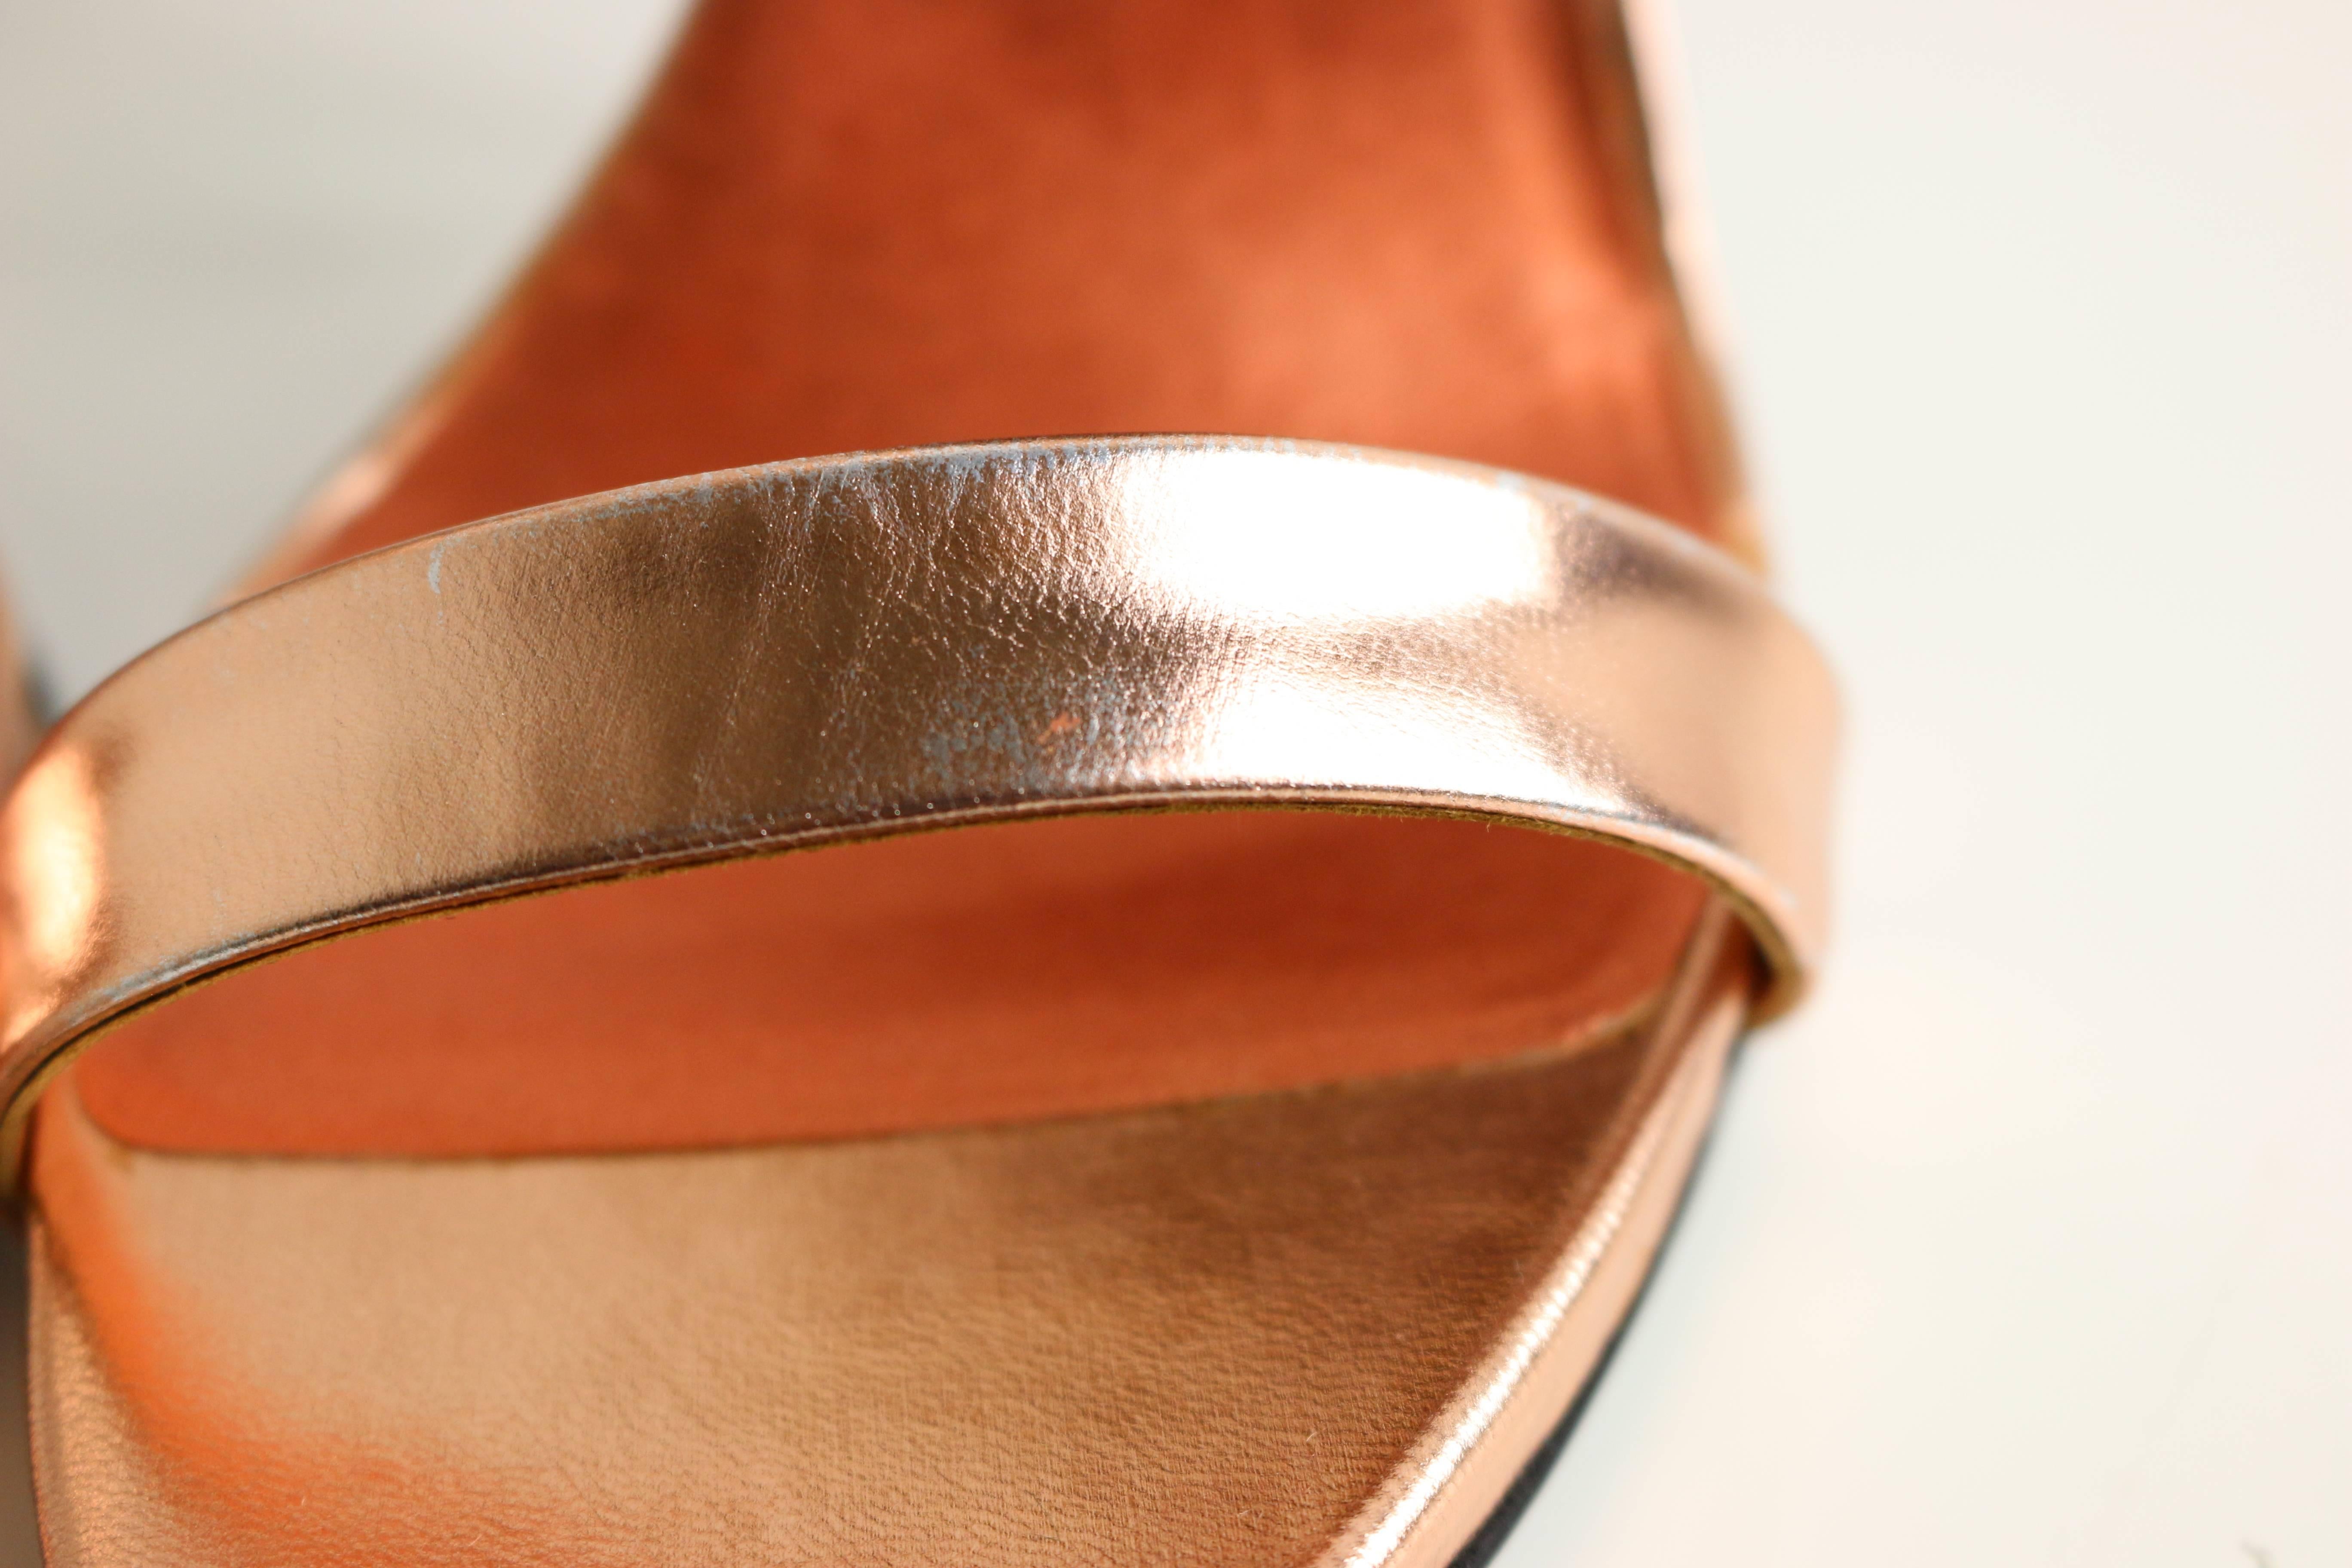 Miu Miu Rose Gold Metallic Sandals  In Excellent Condition For Sale In Sheung Wan, HK